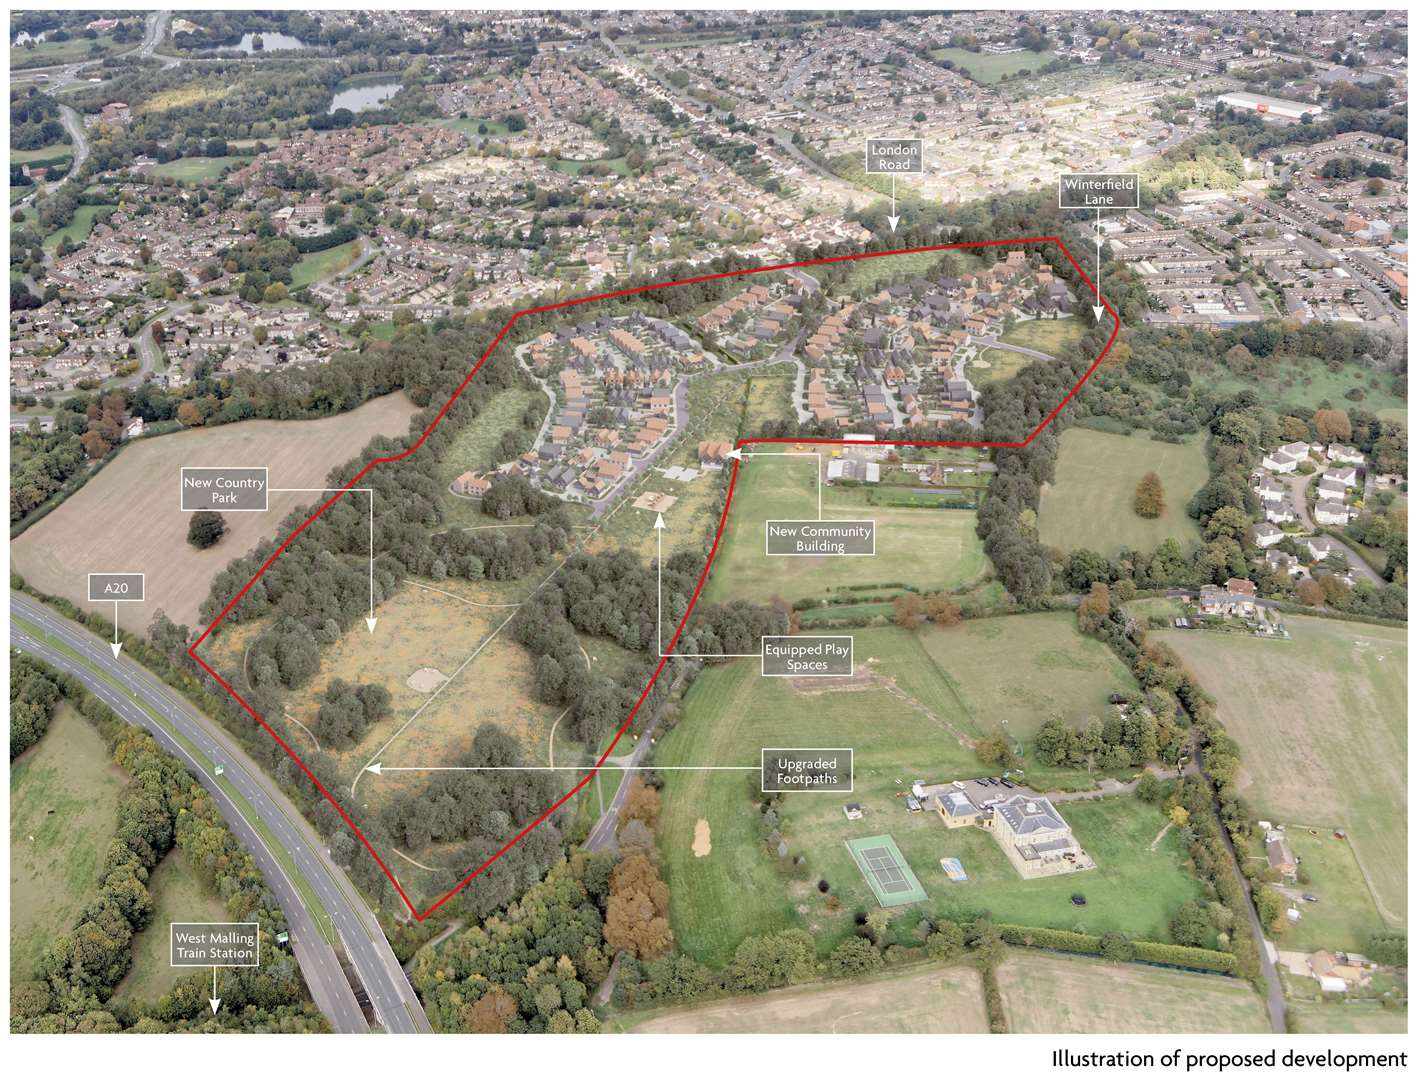 How the Leybourne development could look. Picture: Wates Developments